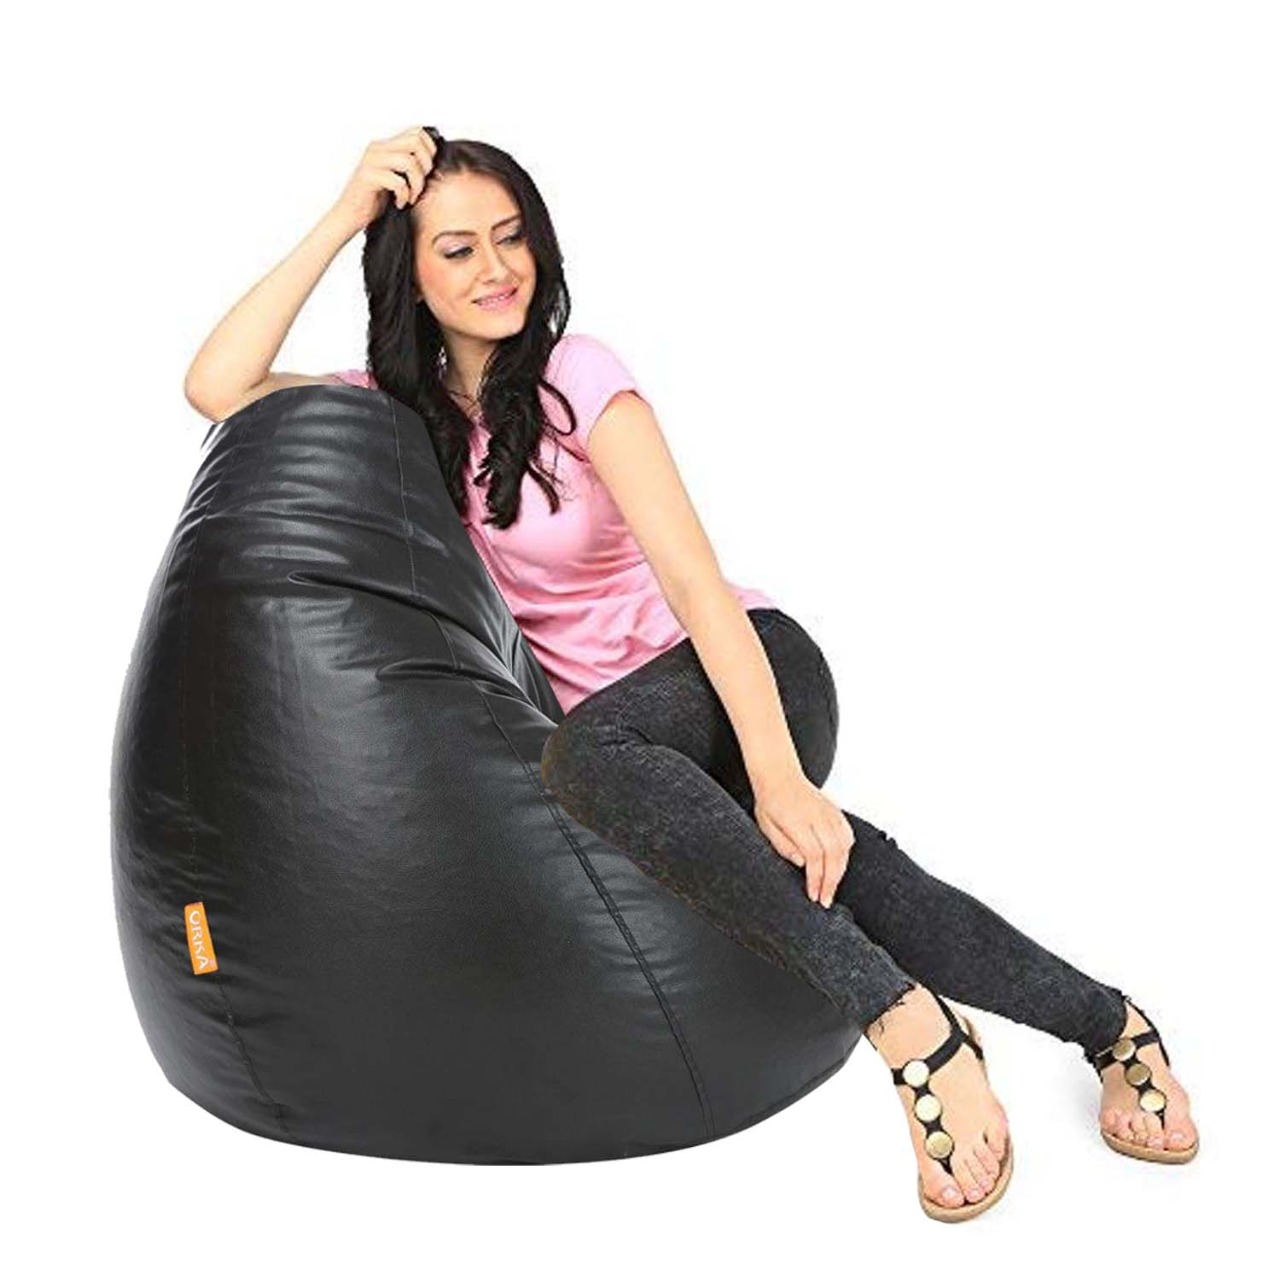 ORKA Classic Black Bean Bag With Matching Puffy